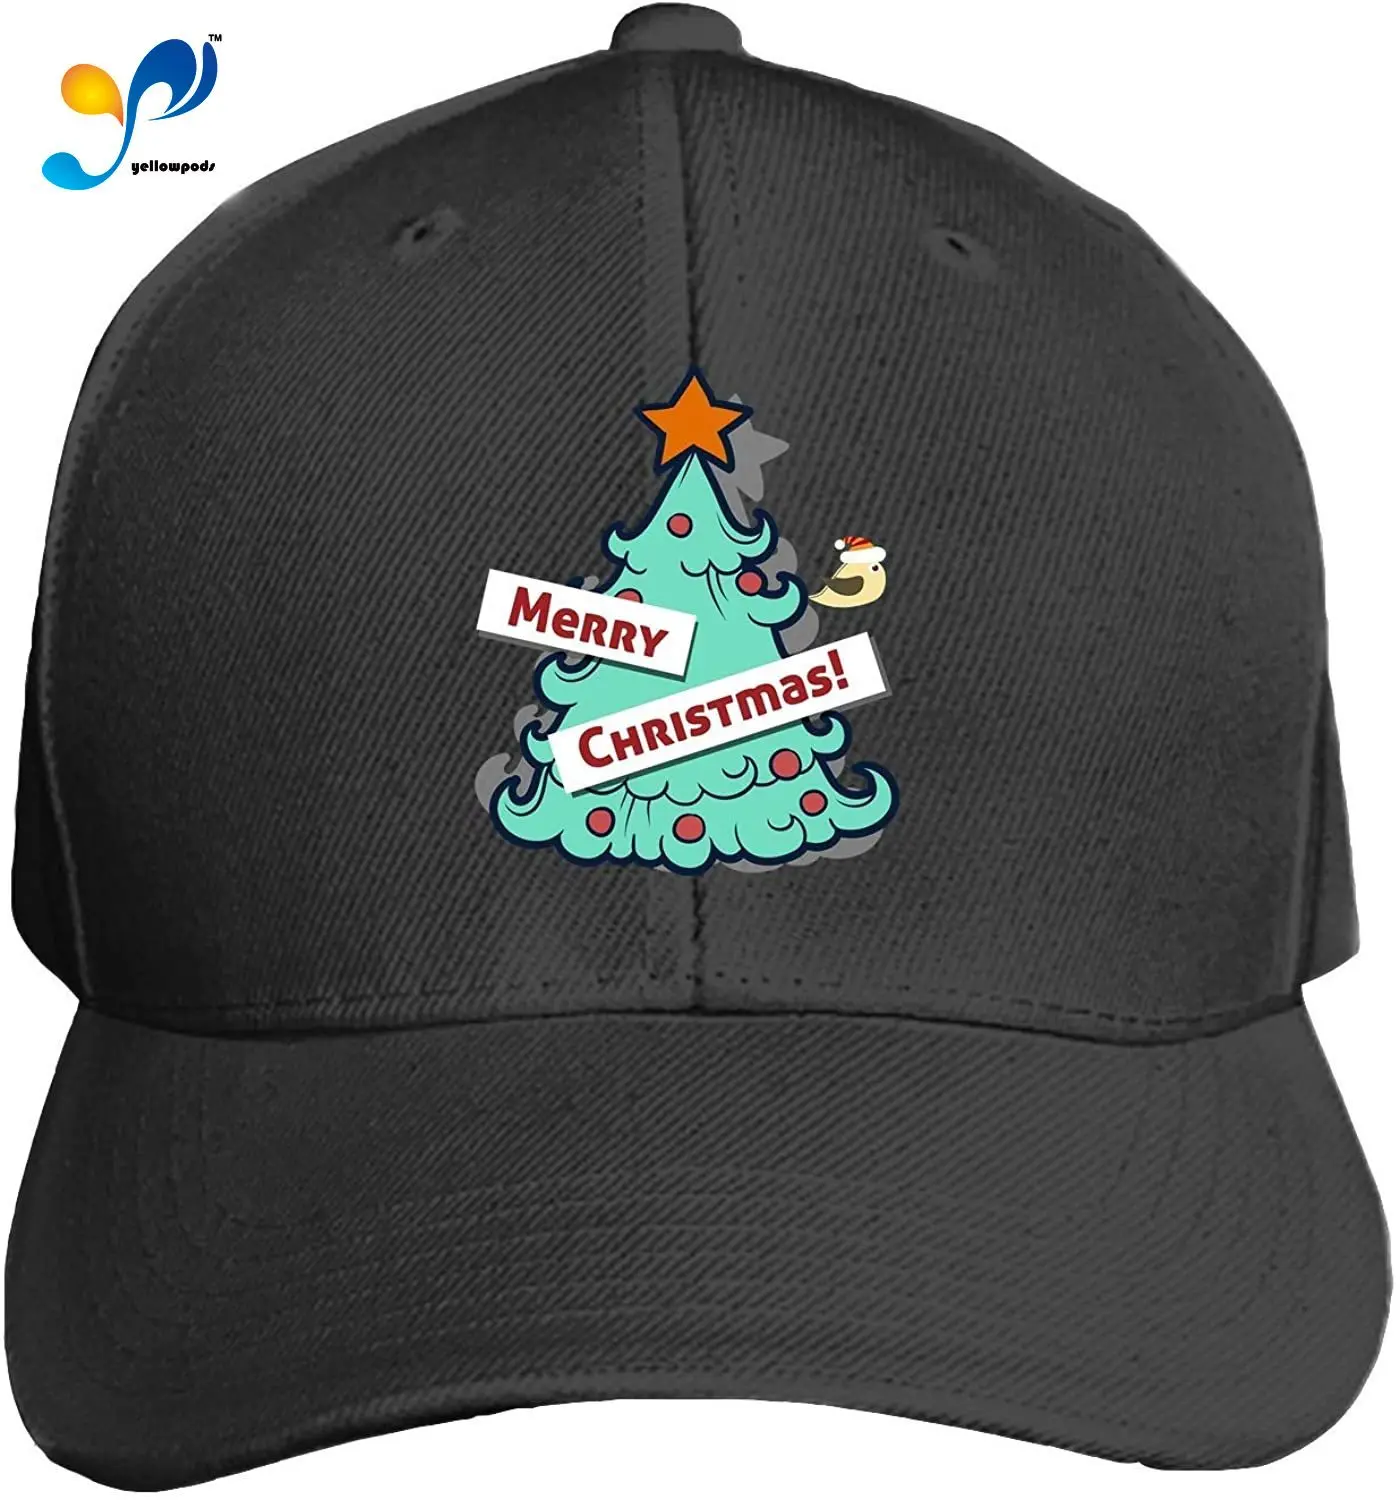 

Merry Christmas Men Structured Twill Cap Adjustable Peaked Sandwich Hat